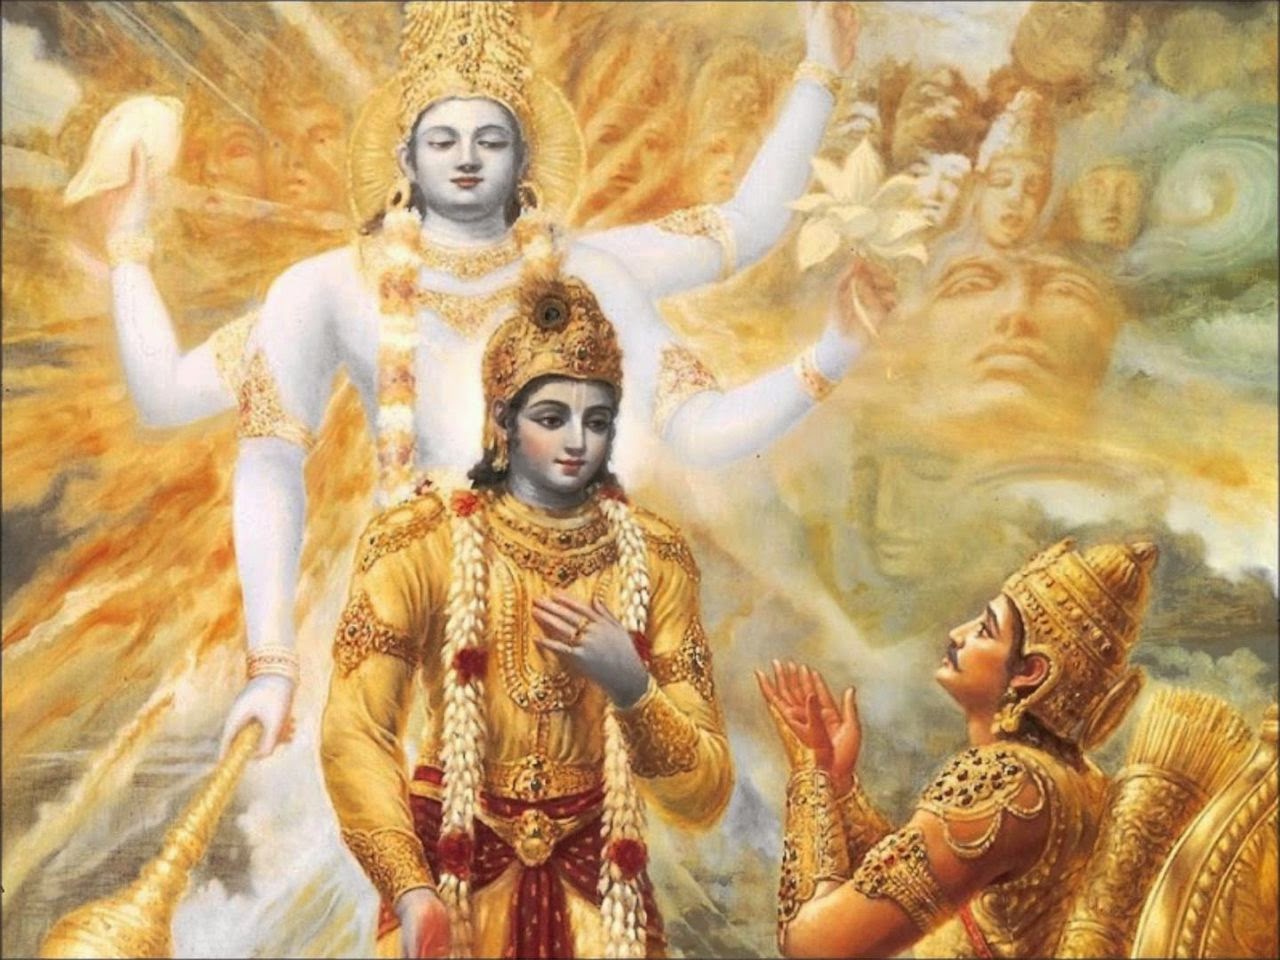 The Importance Of Disobedience In The Bhagavad